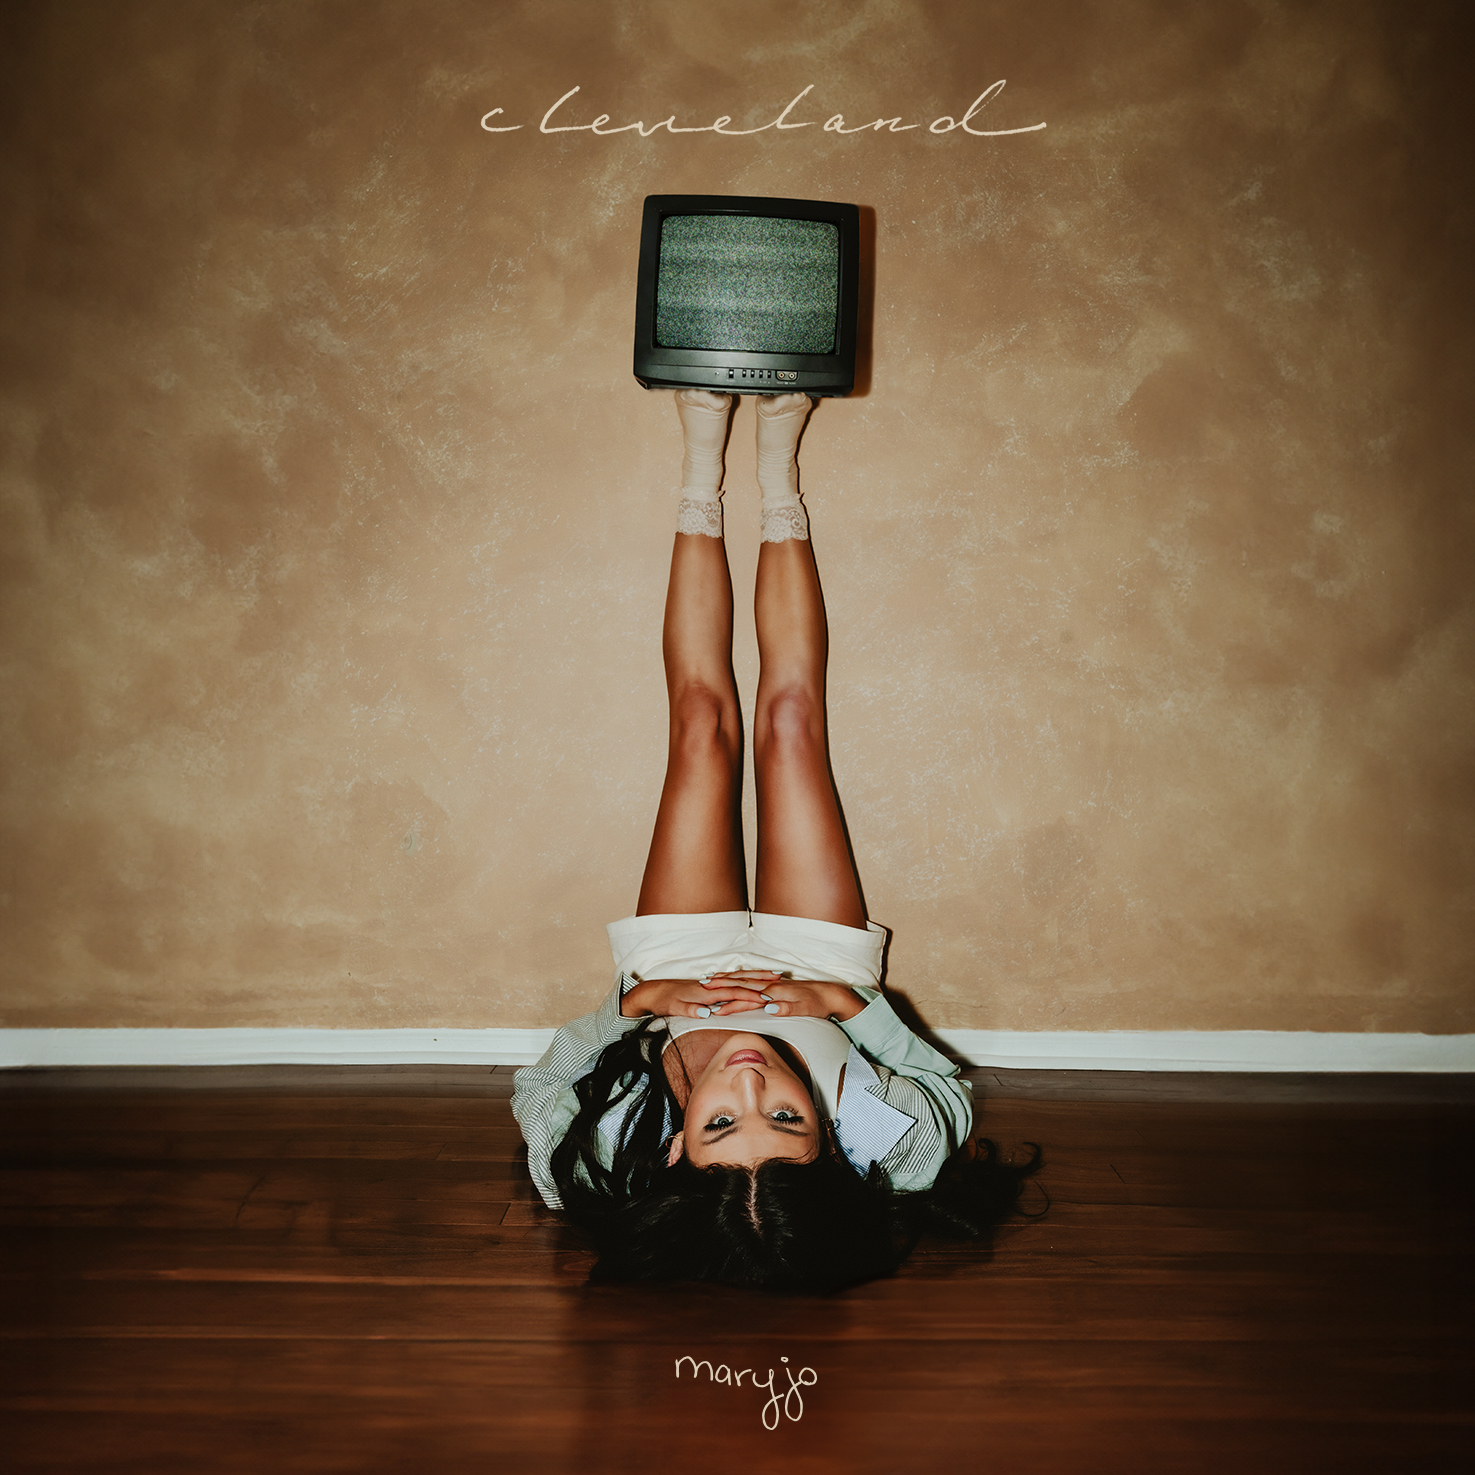 The cover art for Cleveland: maryjo lays on the floor with her legs propped up on the wall and a television balancing on her feet.